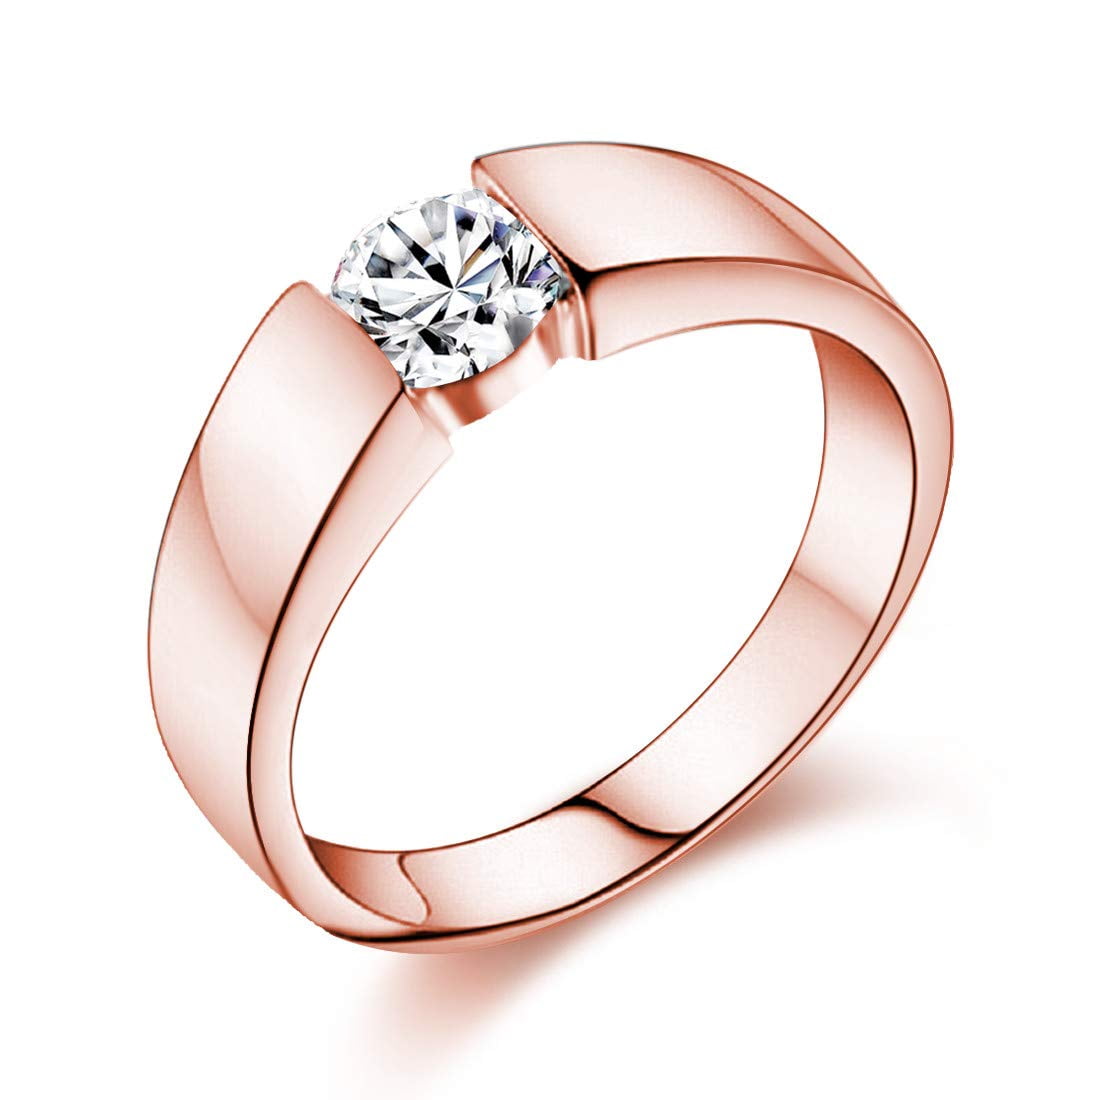 Details about   Sparkling Round Cubic Zirconia Ring Women Wedding Jewelry 14K Rose Gold Plated 